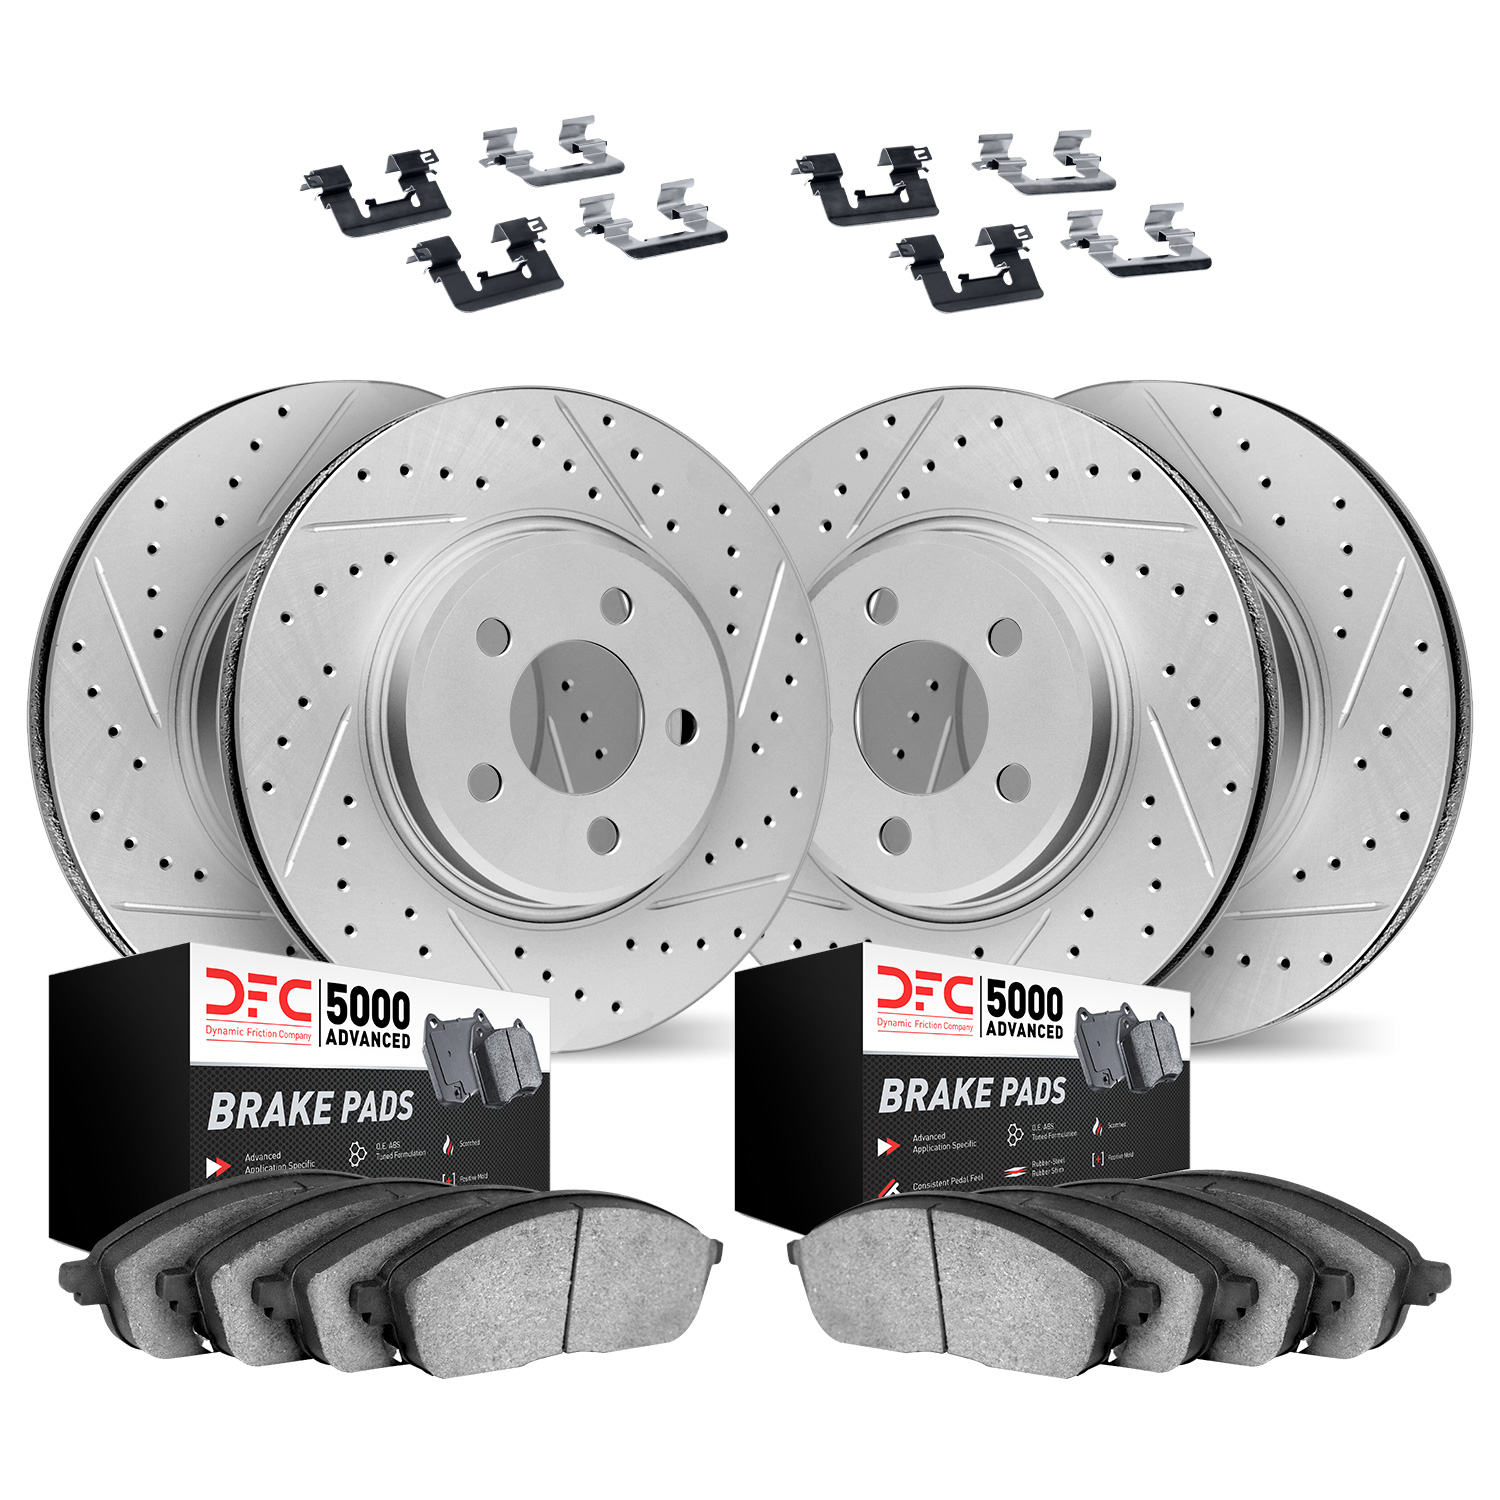 2514-13007 Geoperformance Drilled/Slotted Rotors w/5000 Advanced Brake Pads Kit & Hardware, 2008-2020 Subaru, Position: Front an